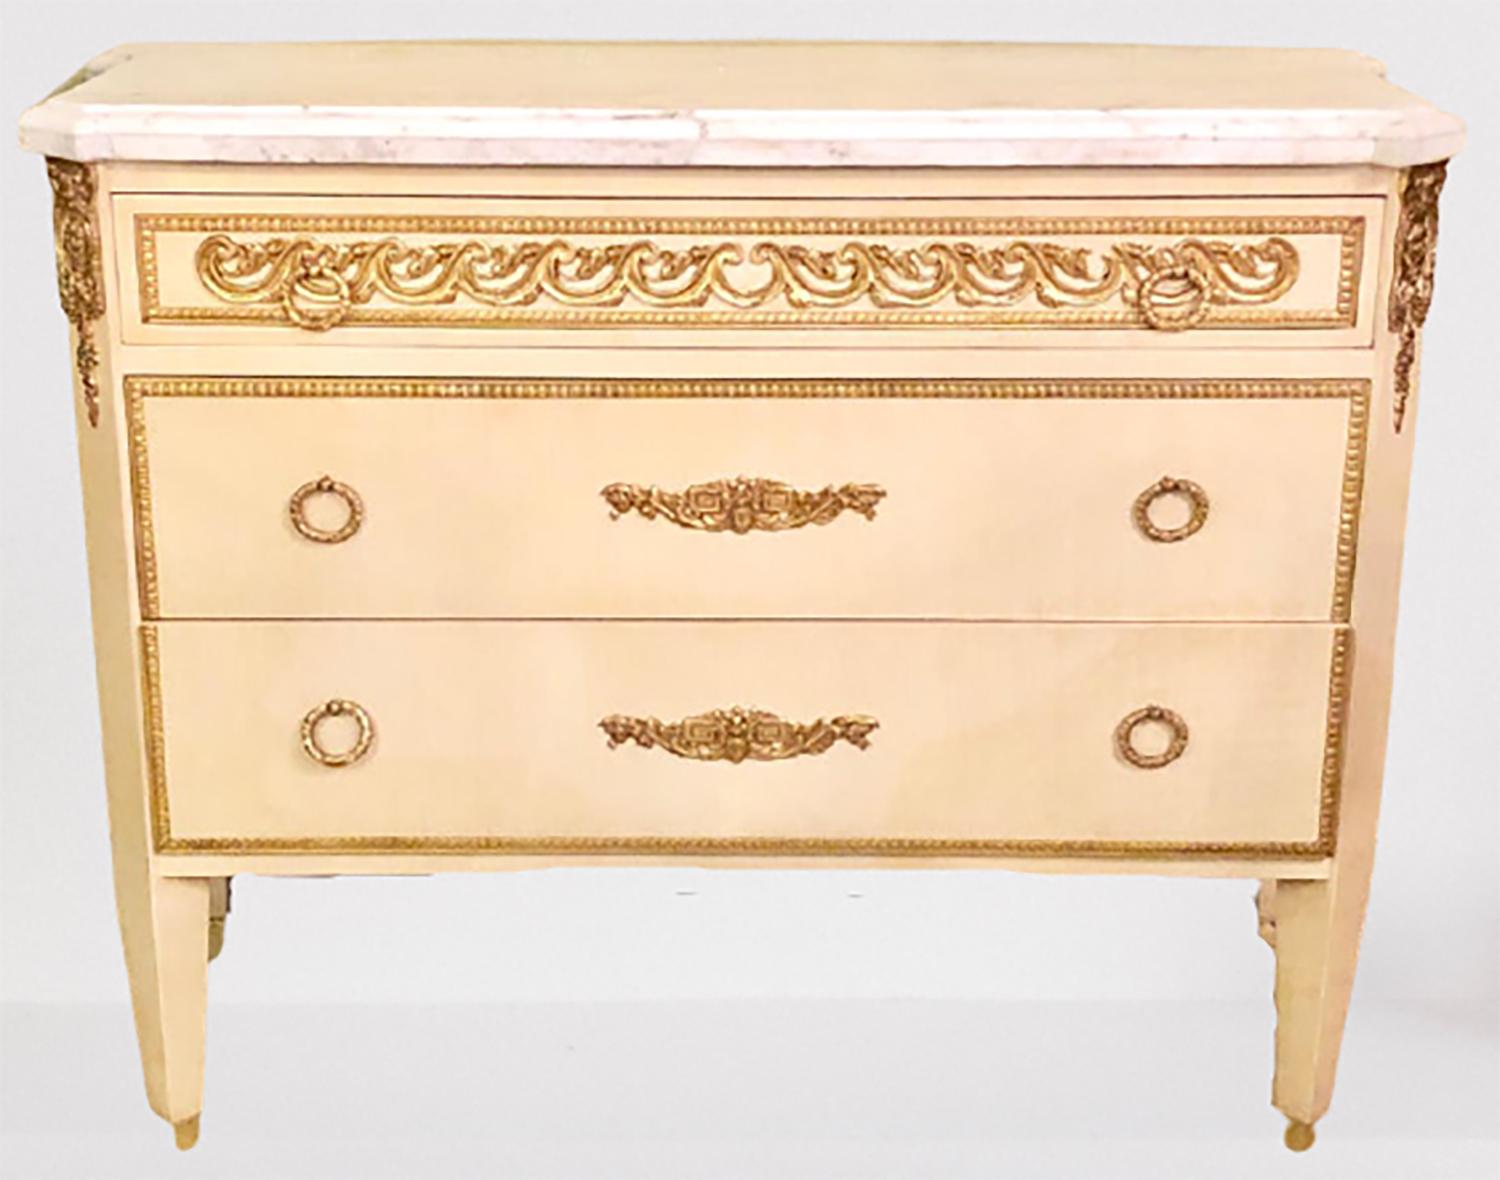 Hollywood Regency Maison Jansen style commodes / cabinets / nightstands a pair. This offer for a fine pair of three graduating Maison Jansen style, in a faux linen white hand painted finish having a marble-top with bronze mounts commodes, cabinets,